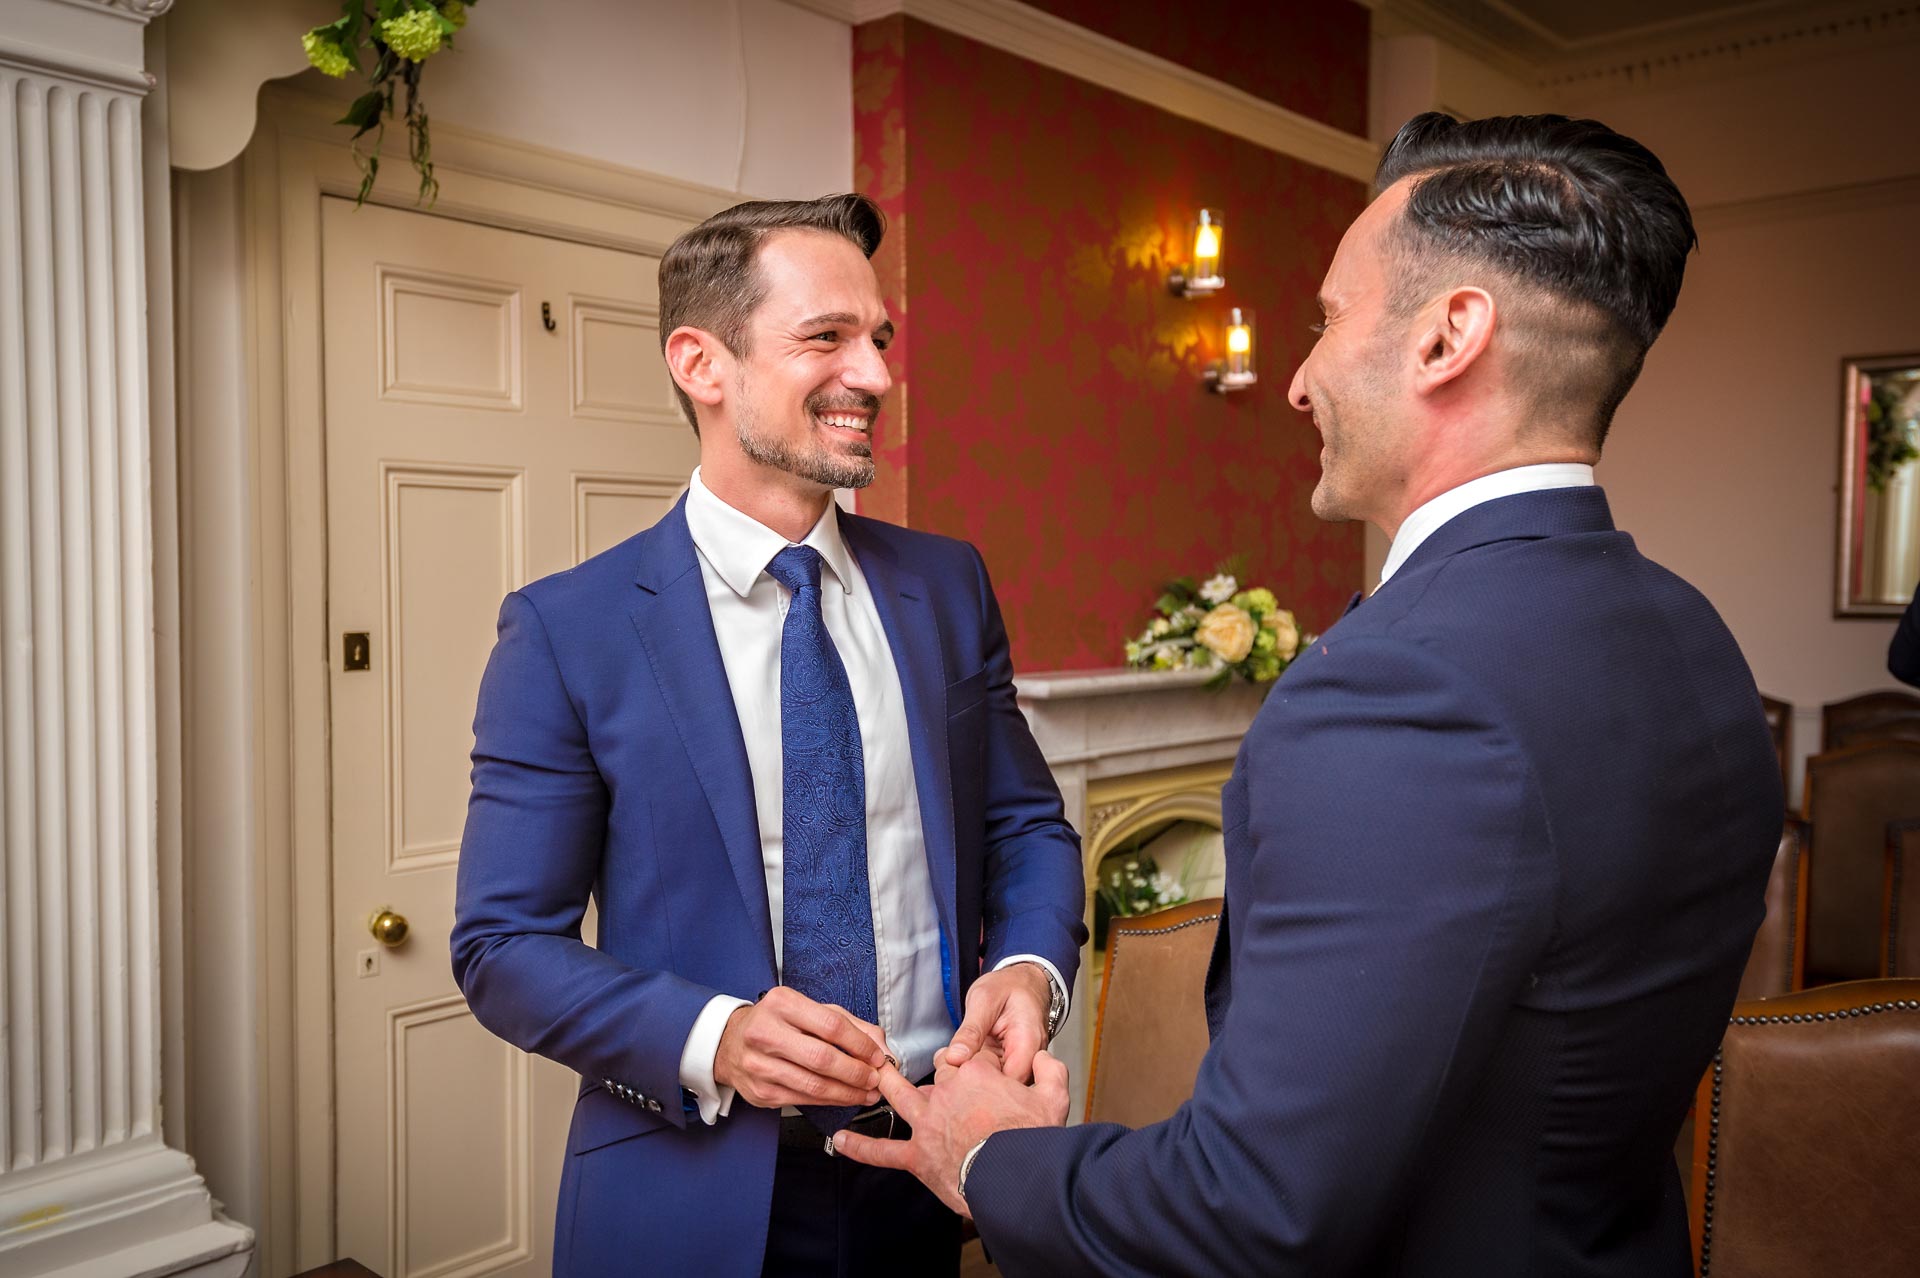 The grooms smiling at exchange of rings during their Southwark wedding, London